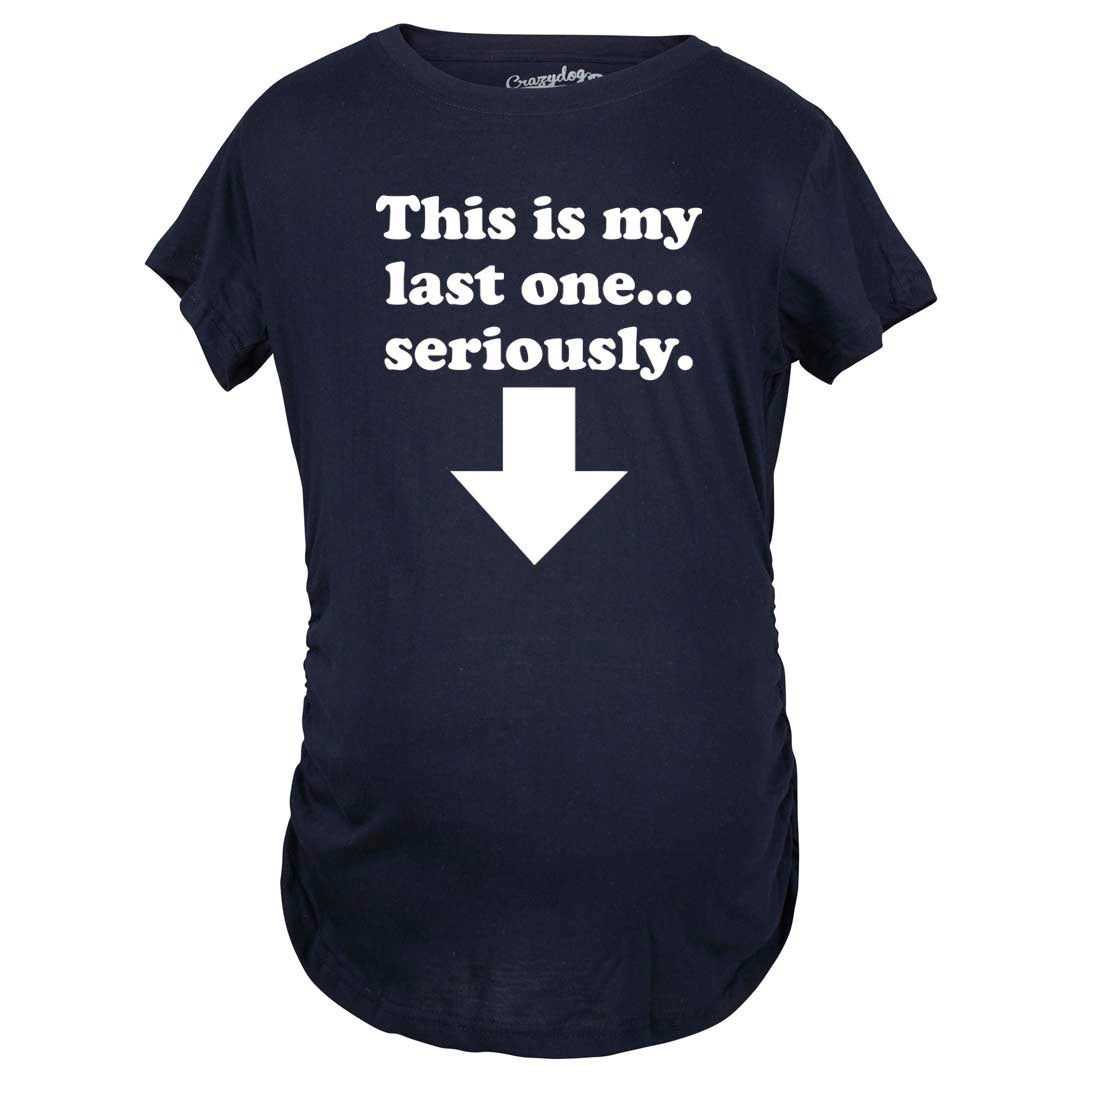 Funny Navy - Last One This Is My Last One Seriously Maternity T Shirt Nerdy Sarcastic Tee